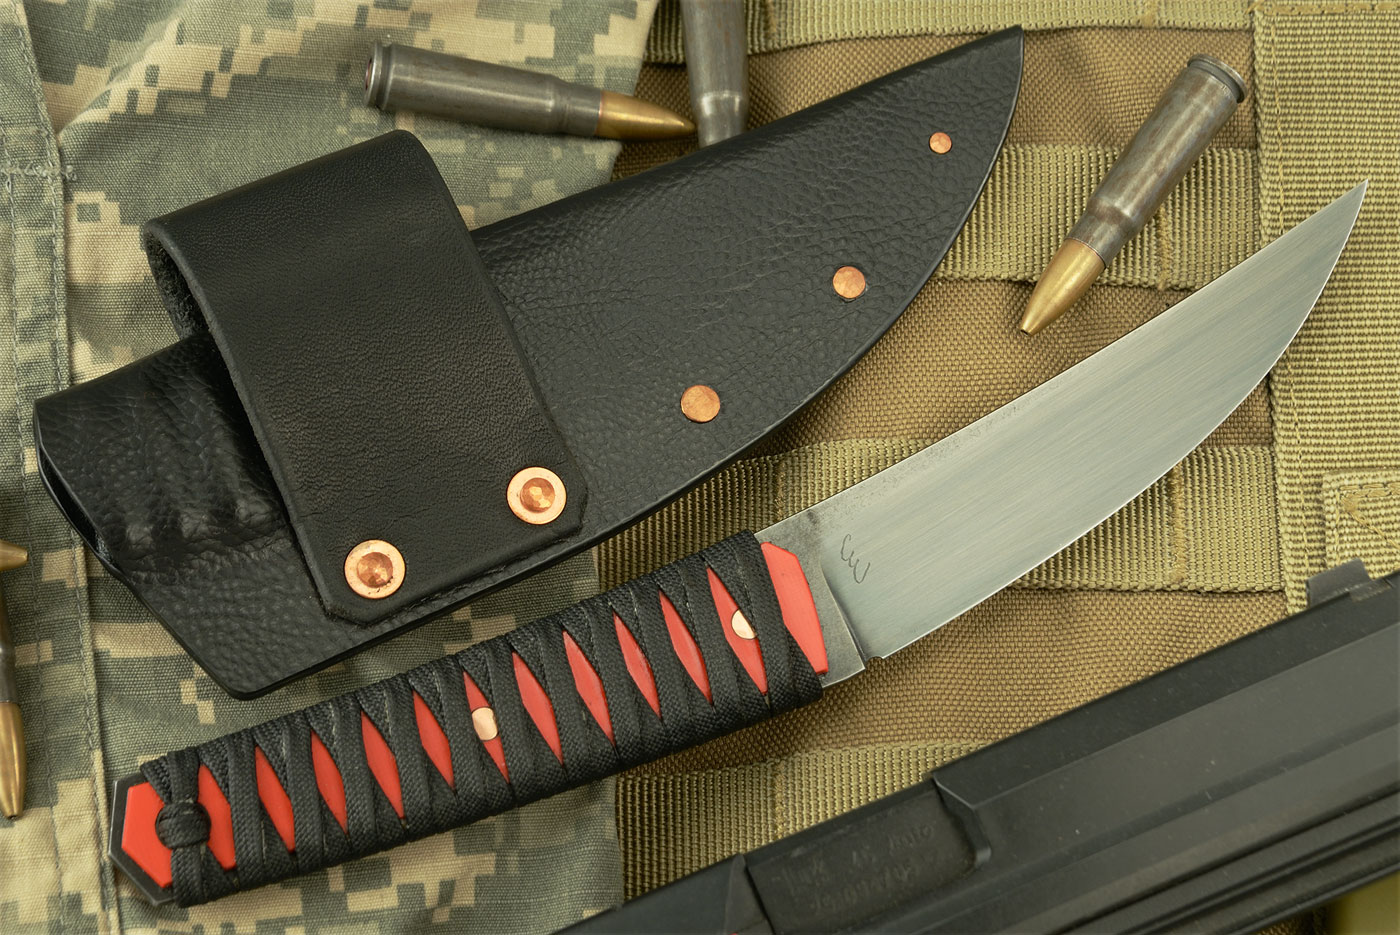 Forged Kwaiken with Red G-10